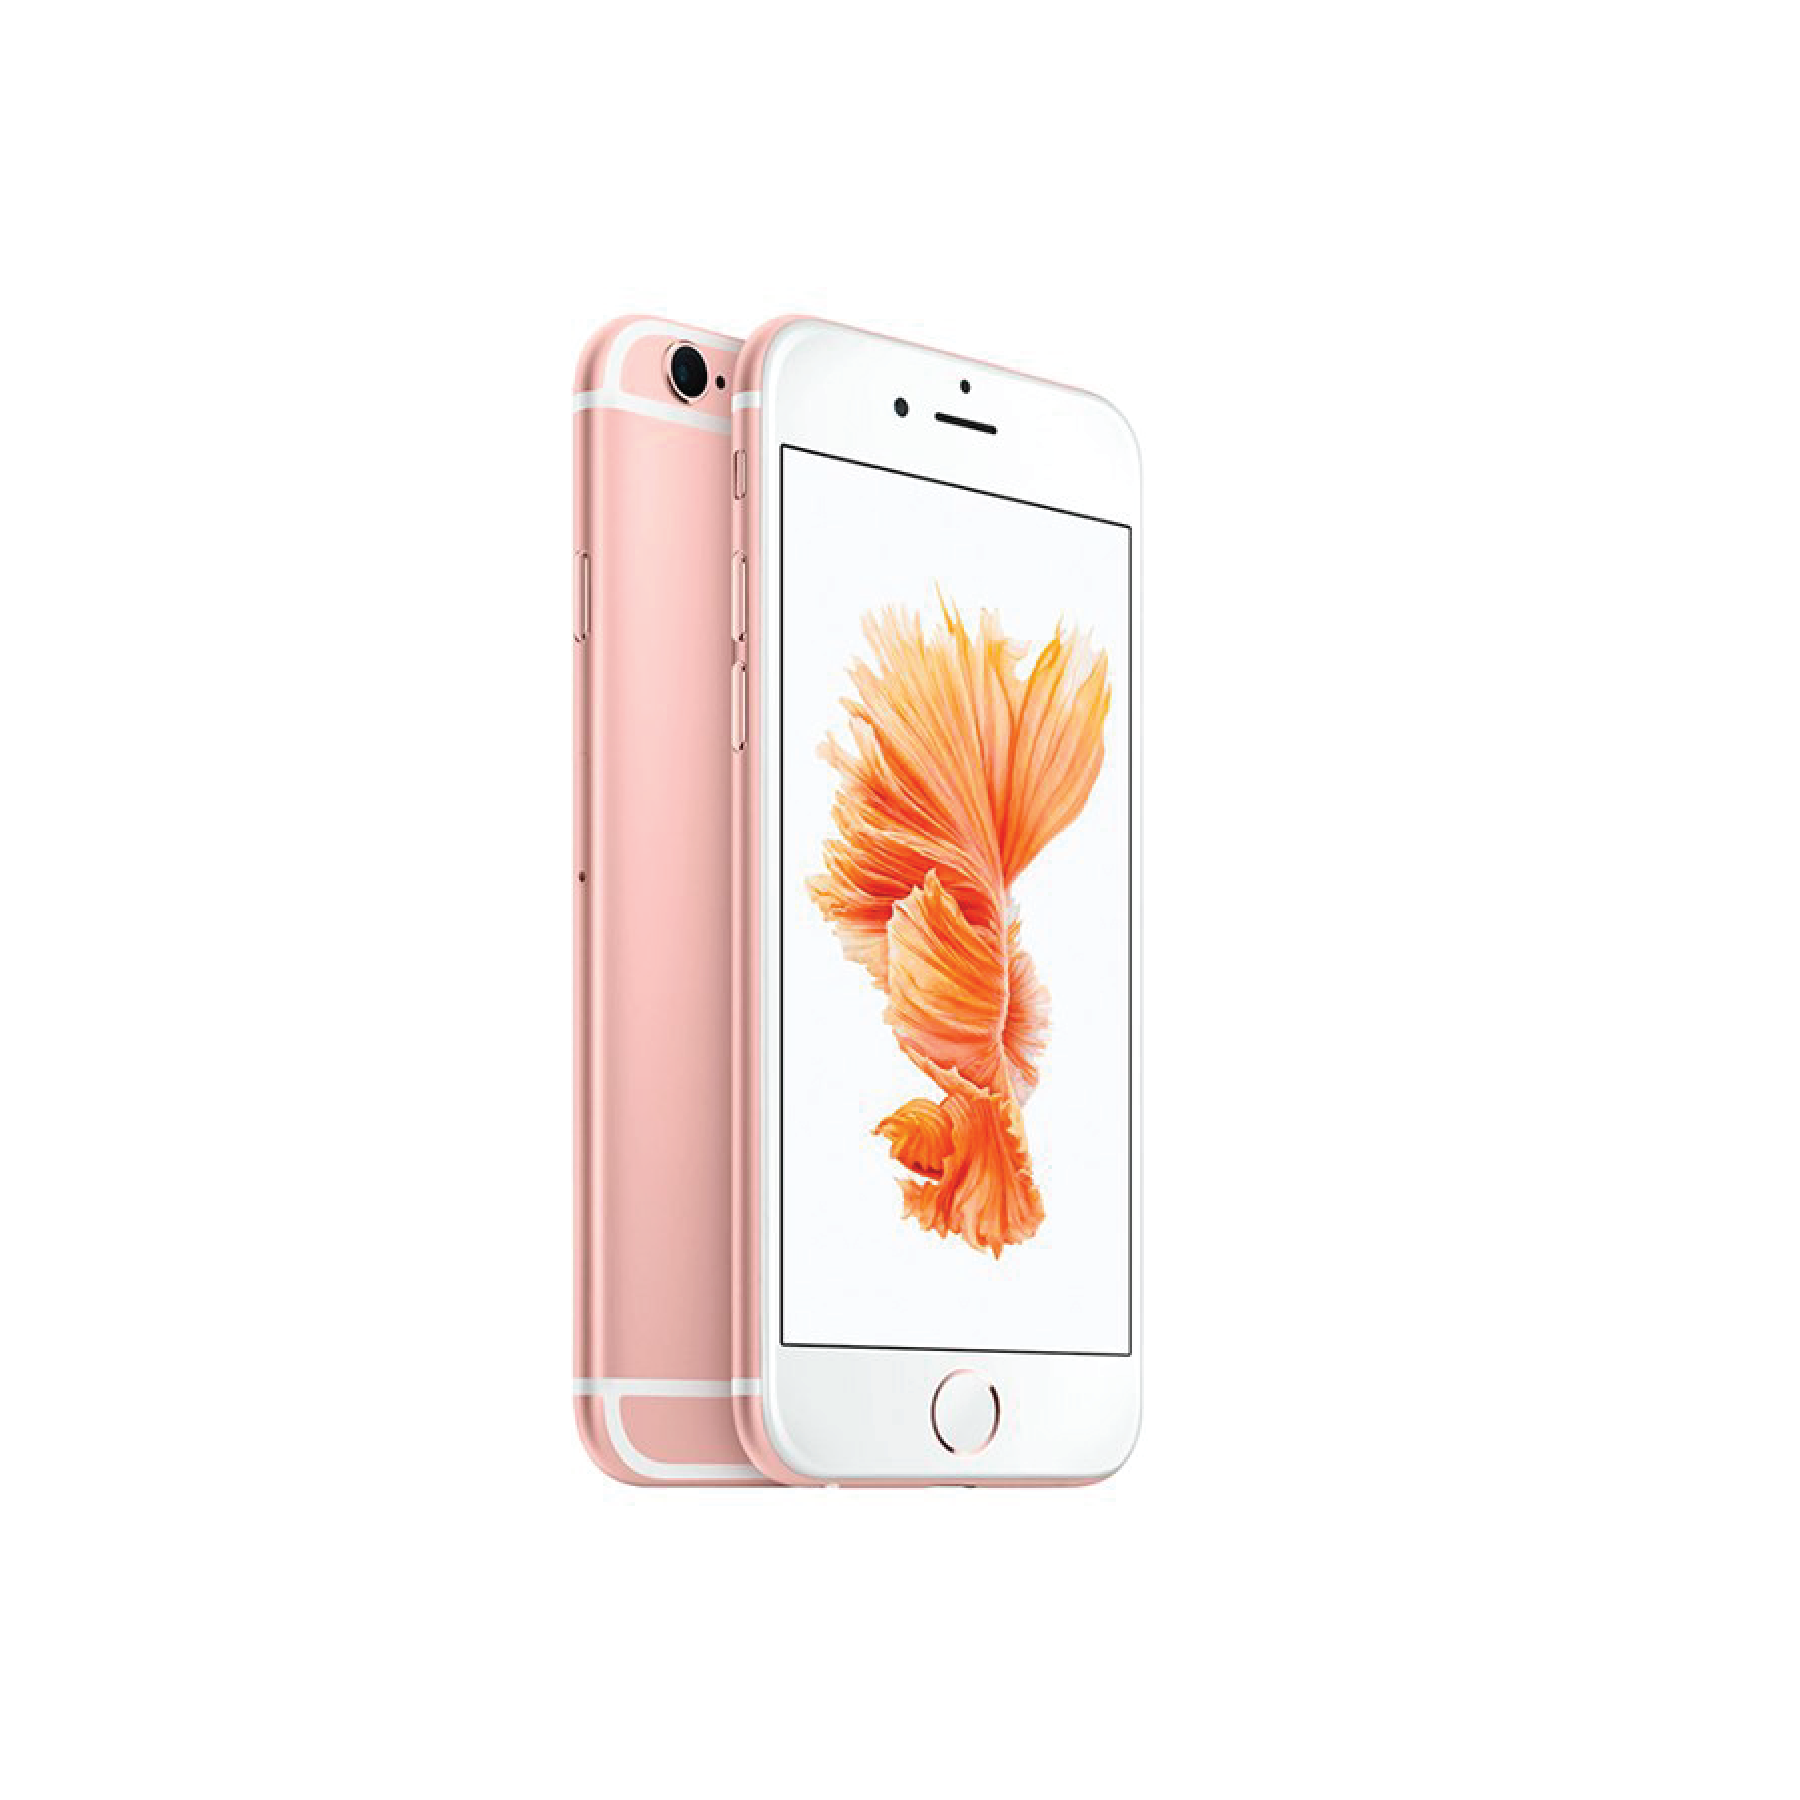 iPhone 6S 64GB - Rose Gold (Best) - iStore Pre-owned